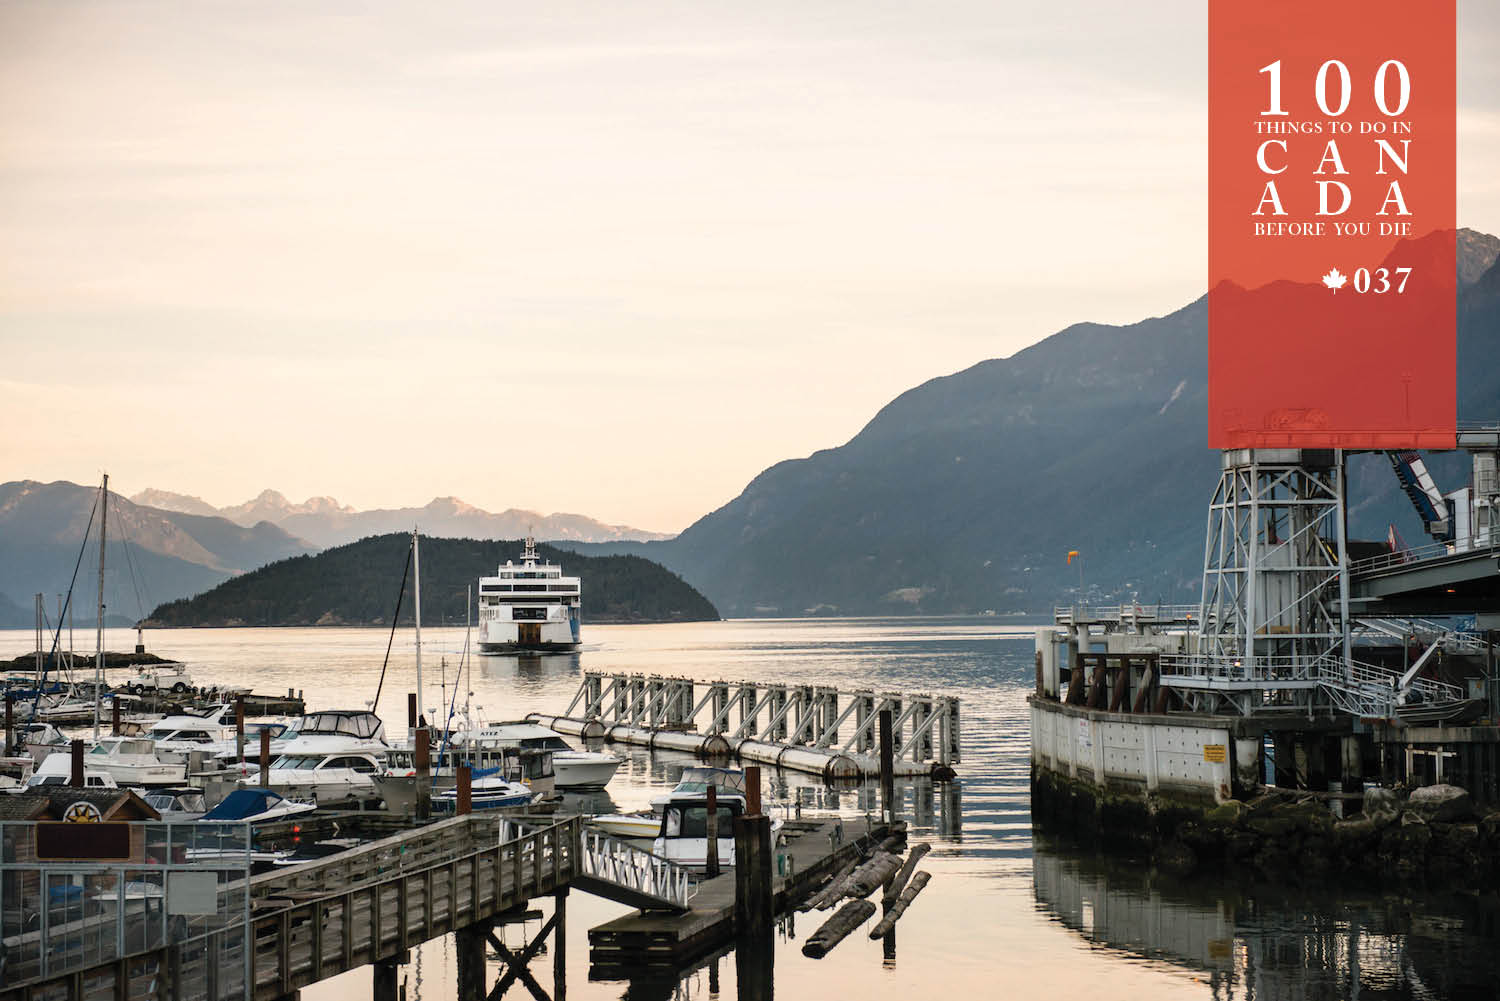 Ply the Inside Passage with British Columbia Ferries